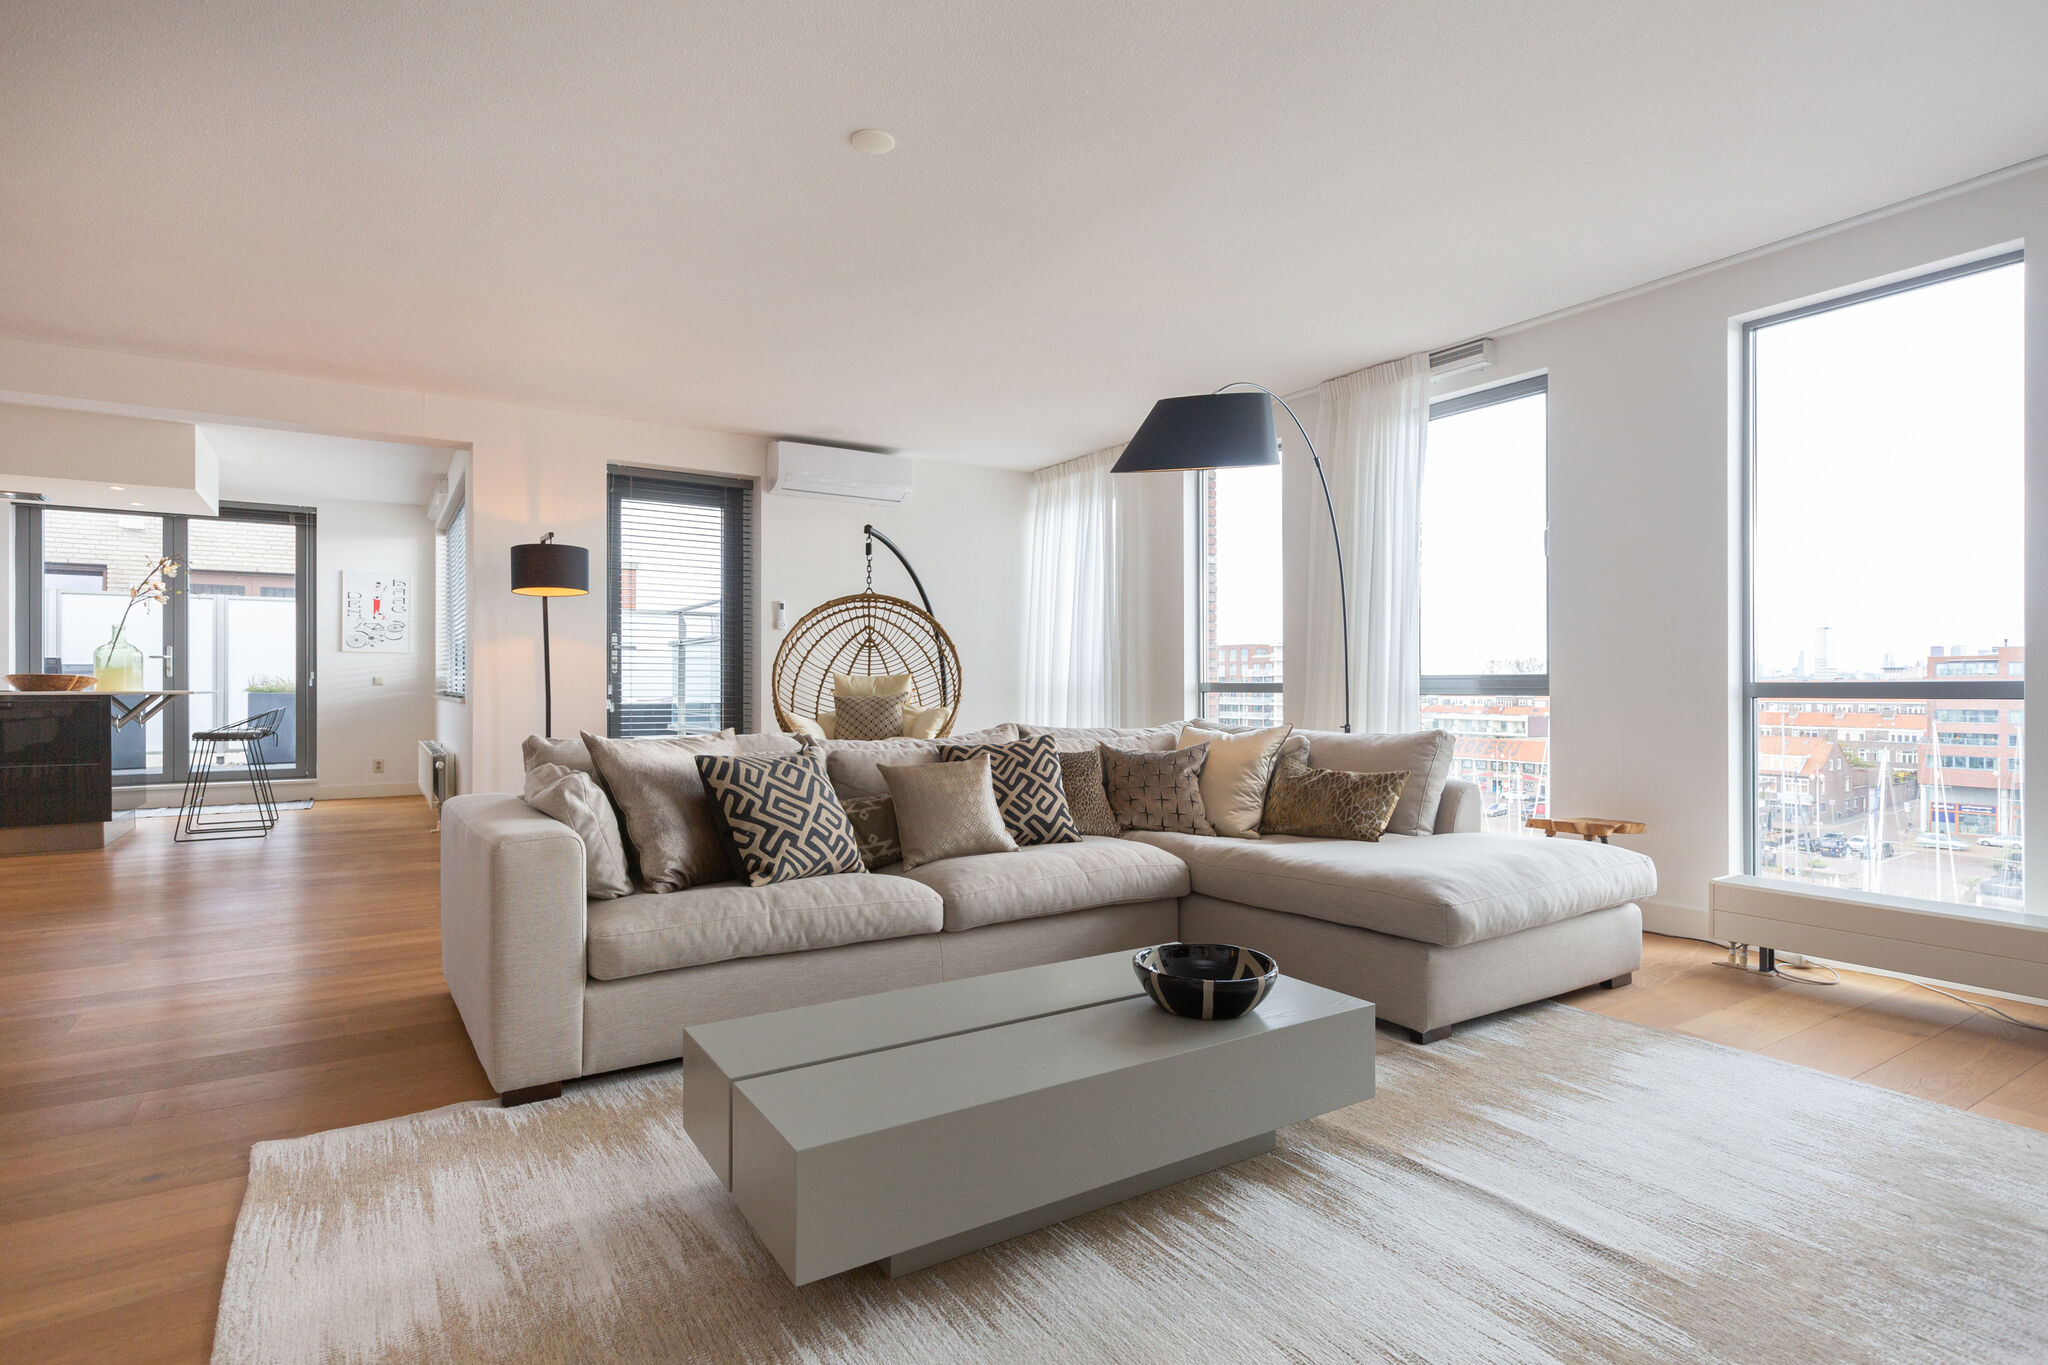 Luxury penthouse in Scheveningen with roof terrace and beautiful view